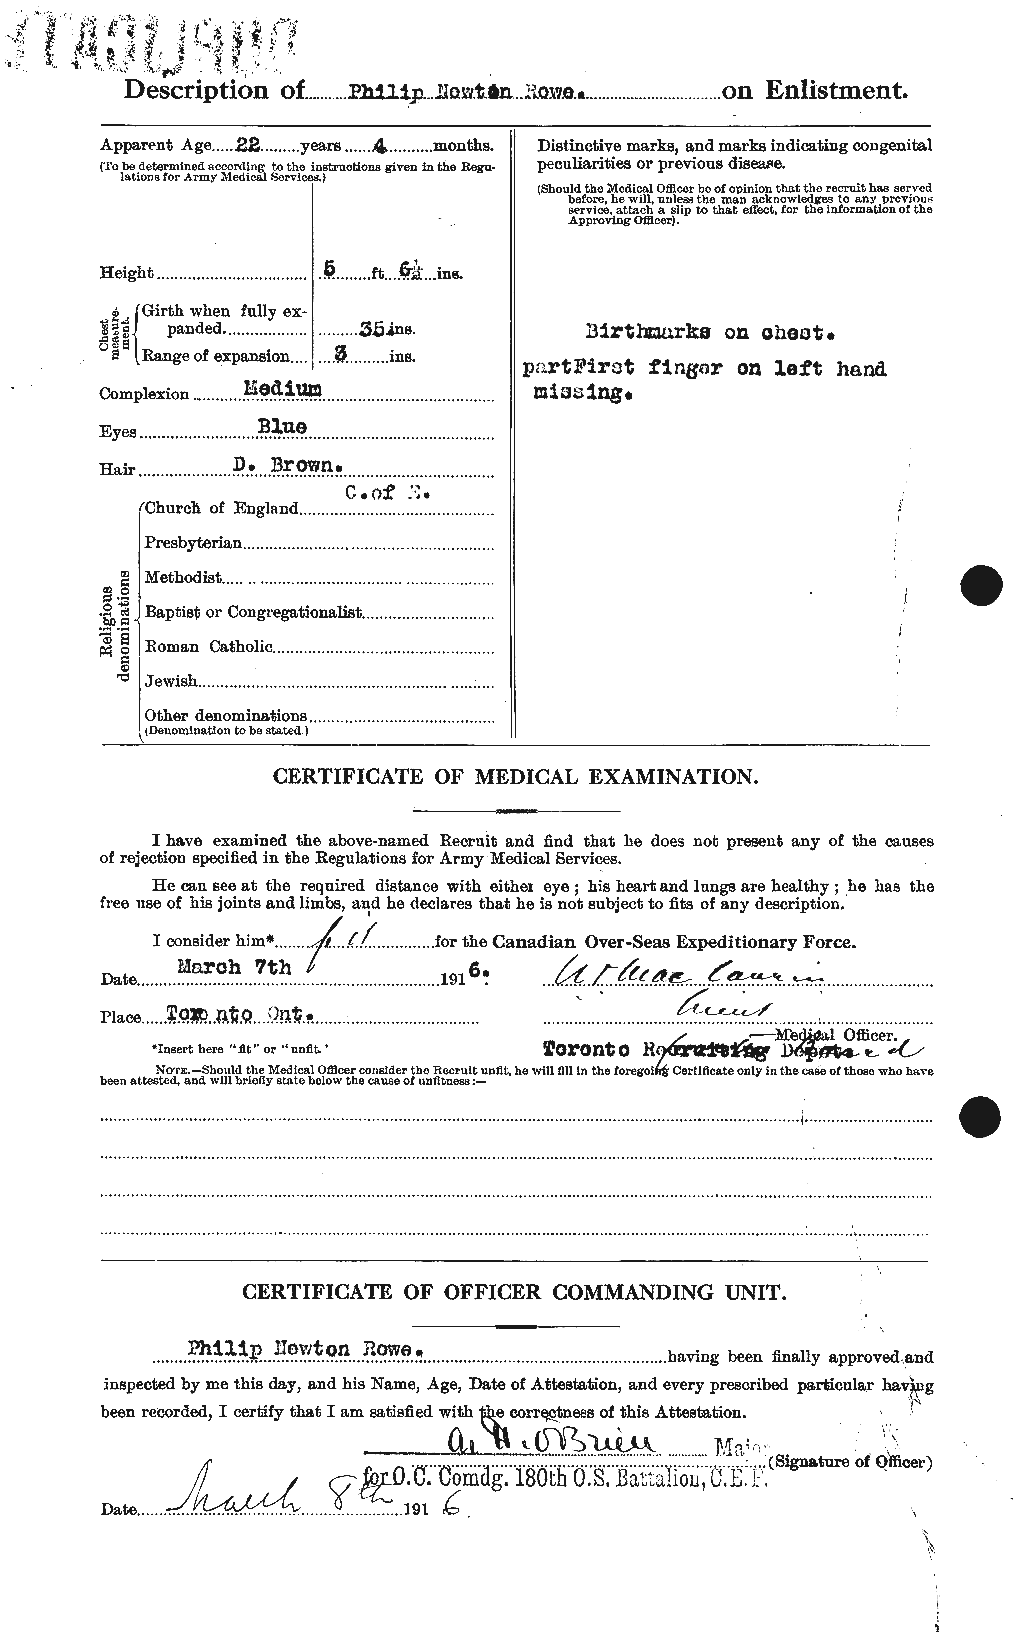 Personnel Records of the First World War - CEF 615961b